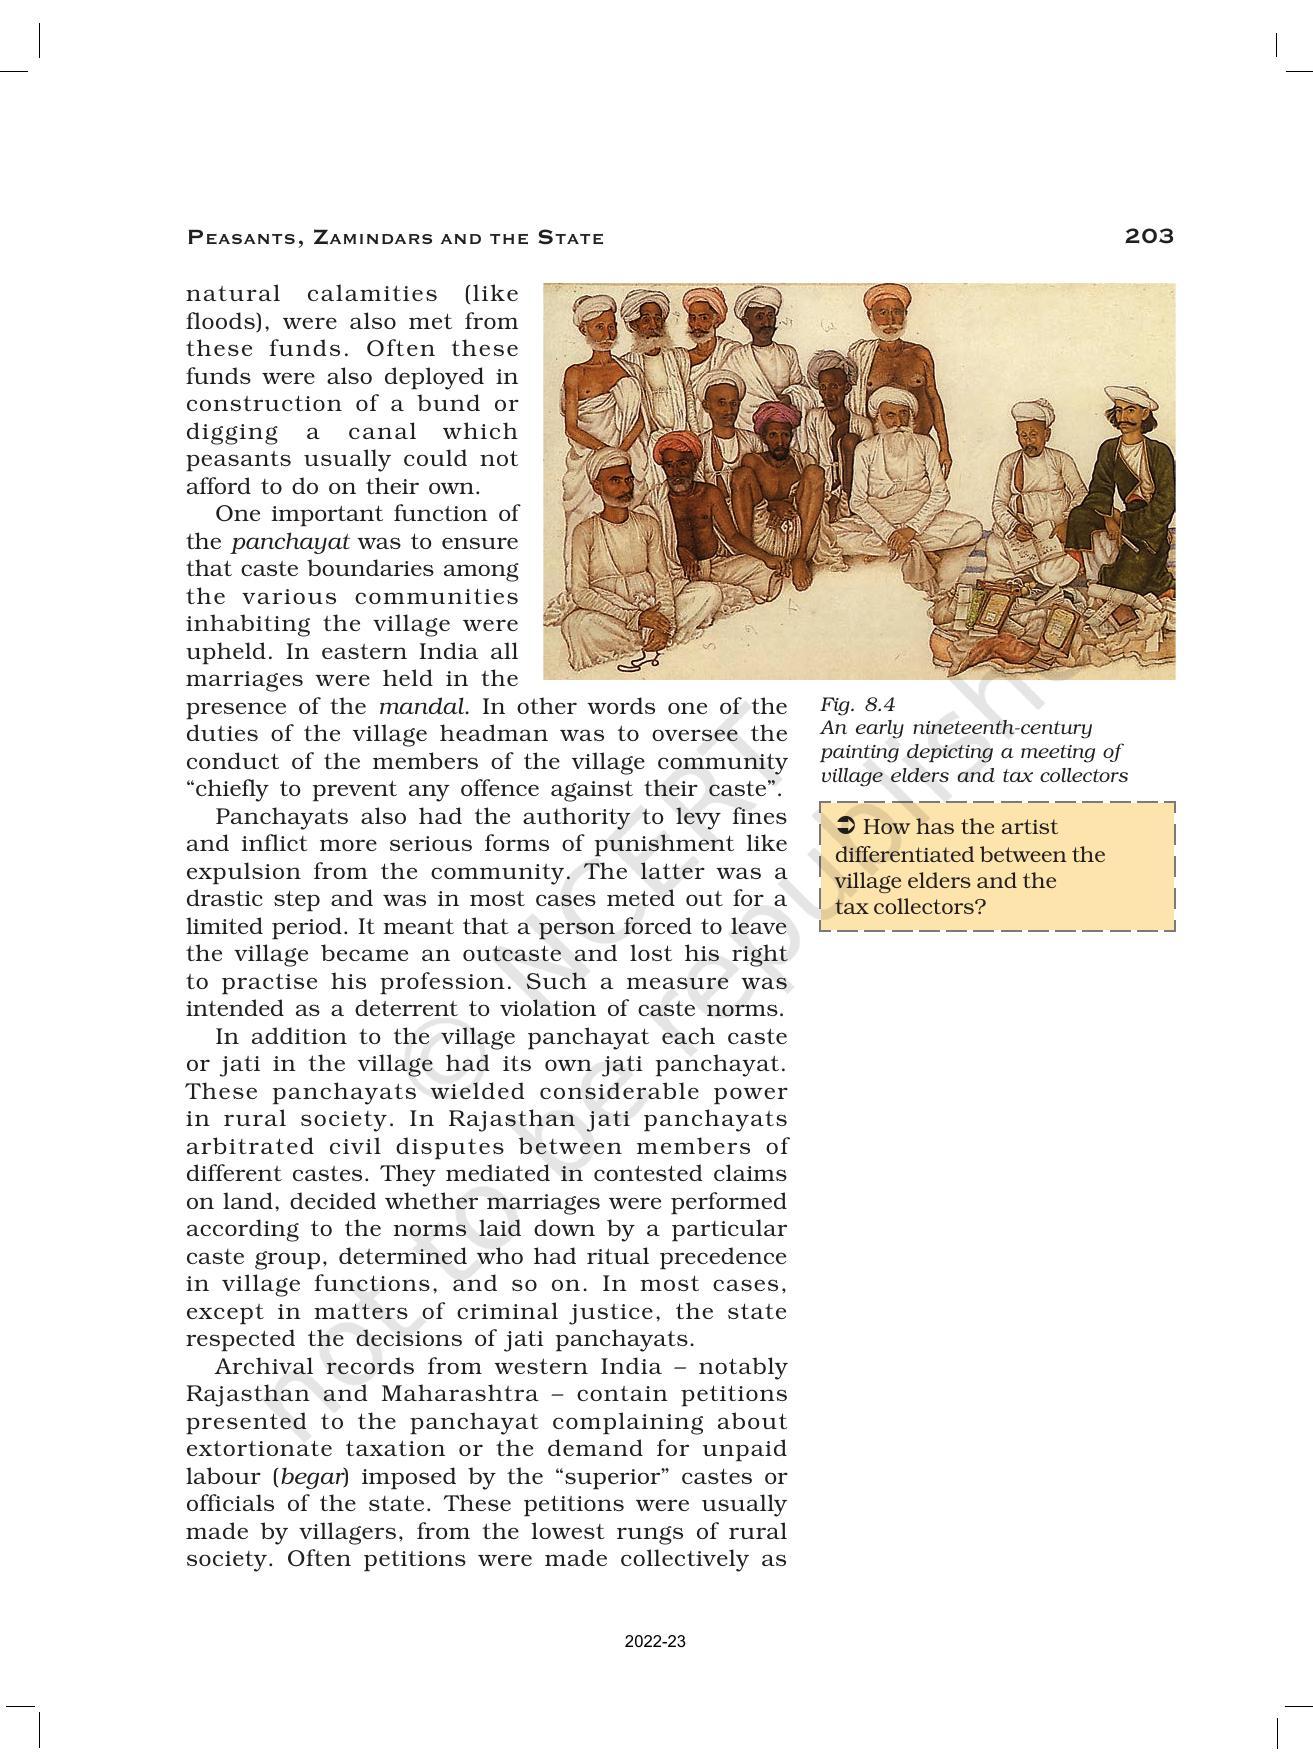 NCERT Book for Class 12 History (Part-II) Chapter 8 Peasants, Zamindars, and the State - Page 8